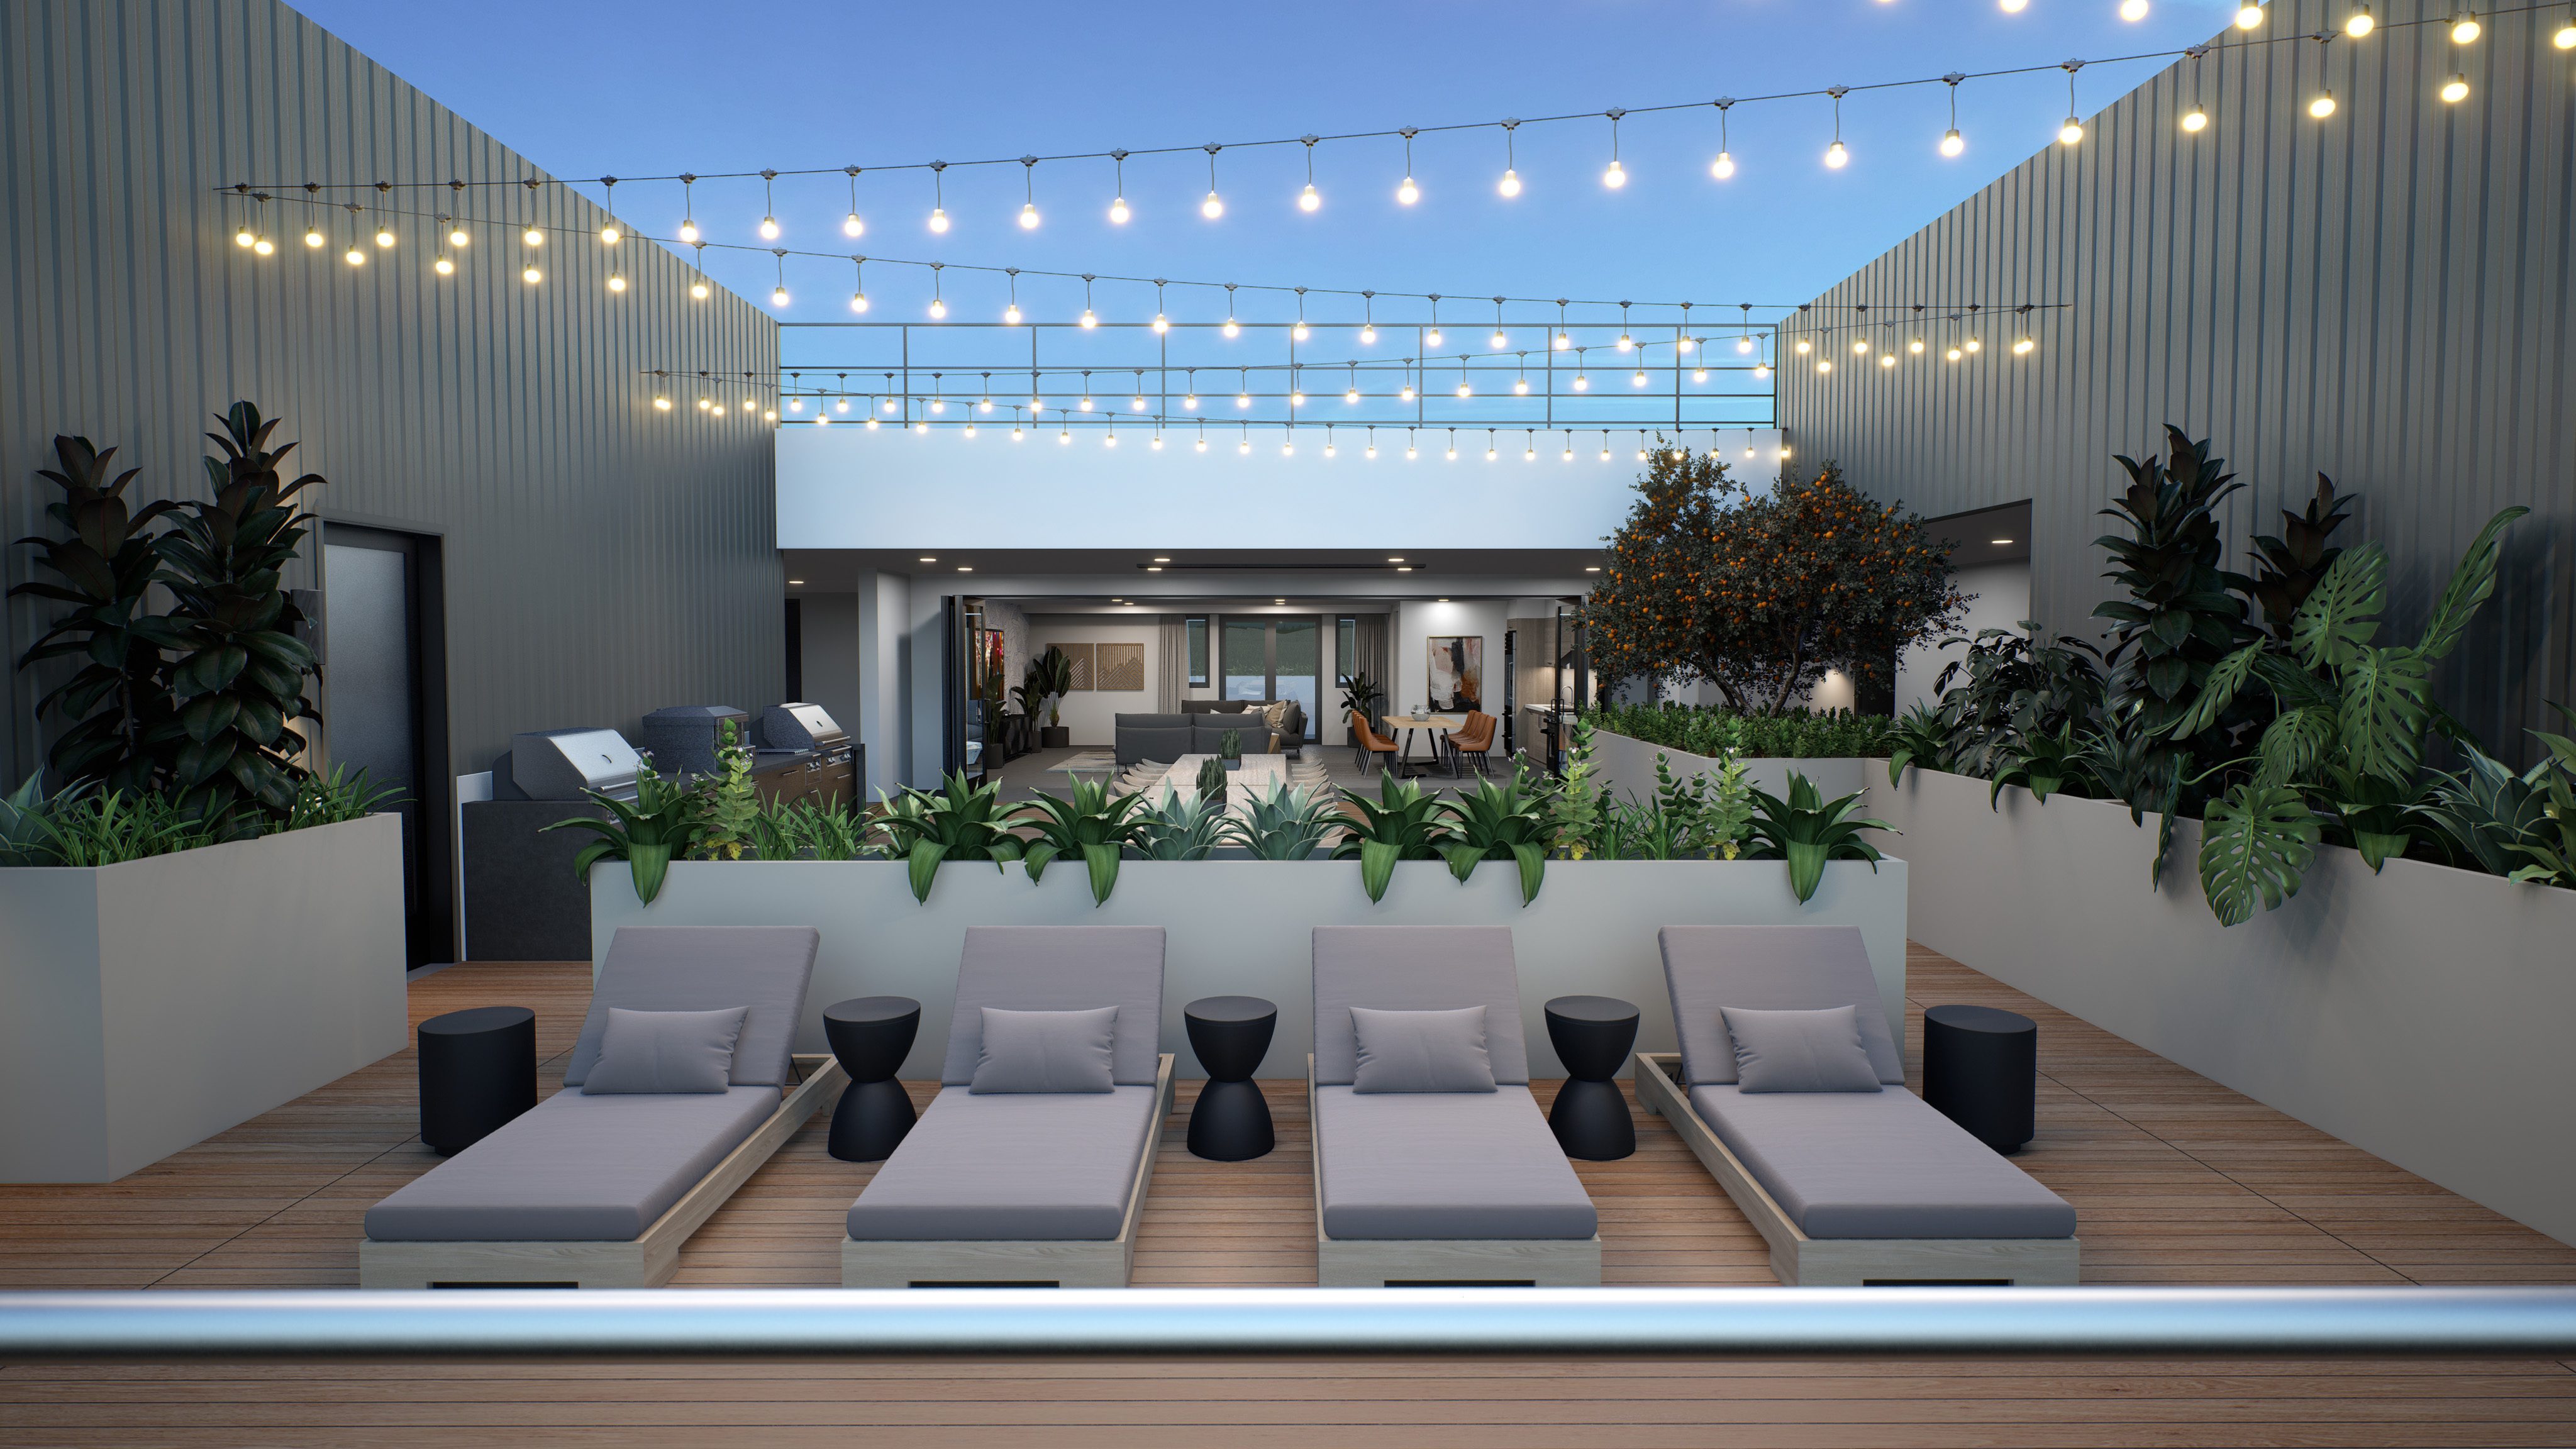 Gray lounge chairs on outdoor patio with greenery and string lights above with open lounge/kitchen area in the background